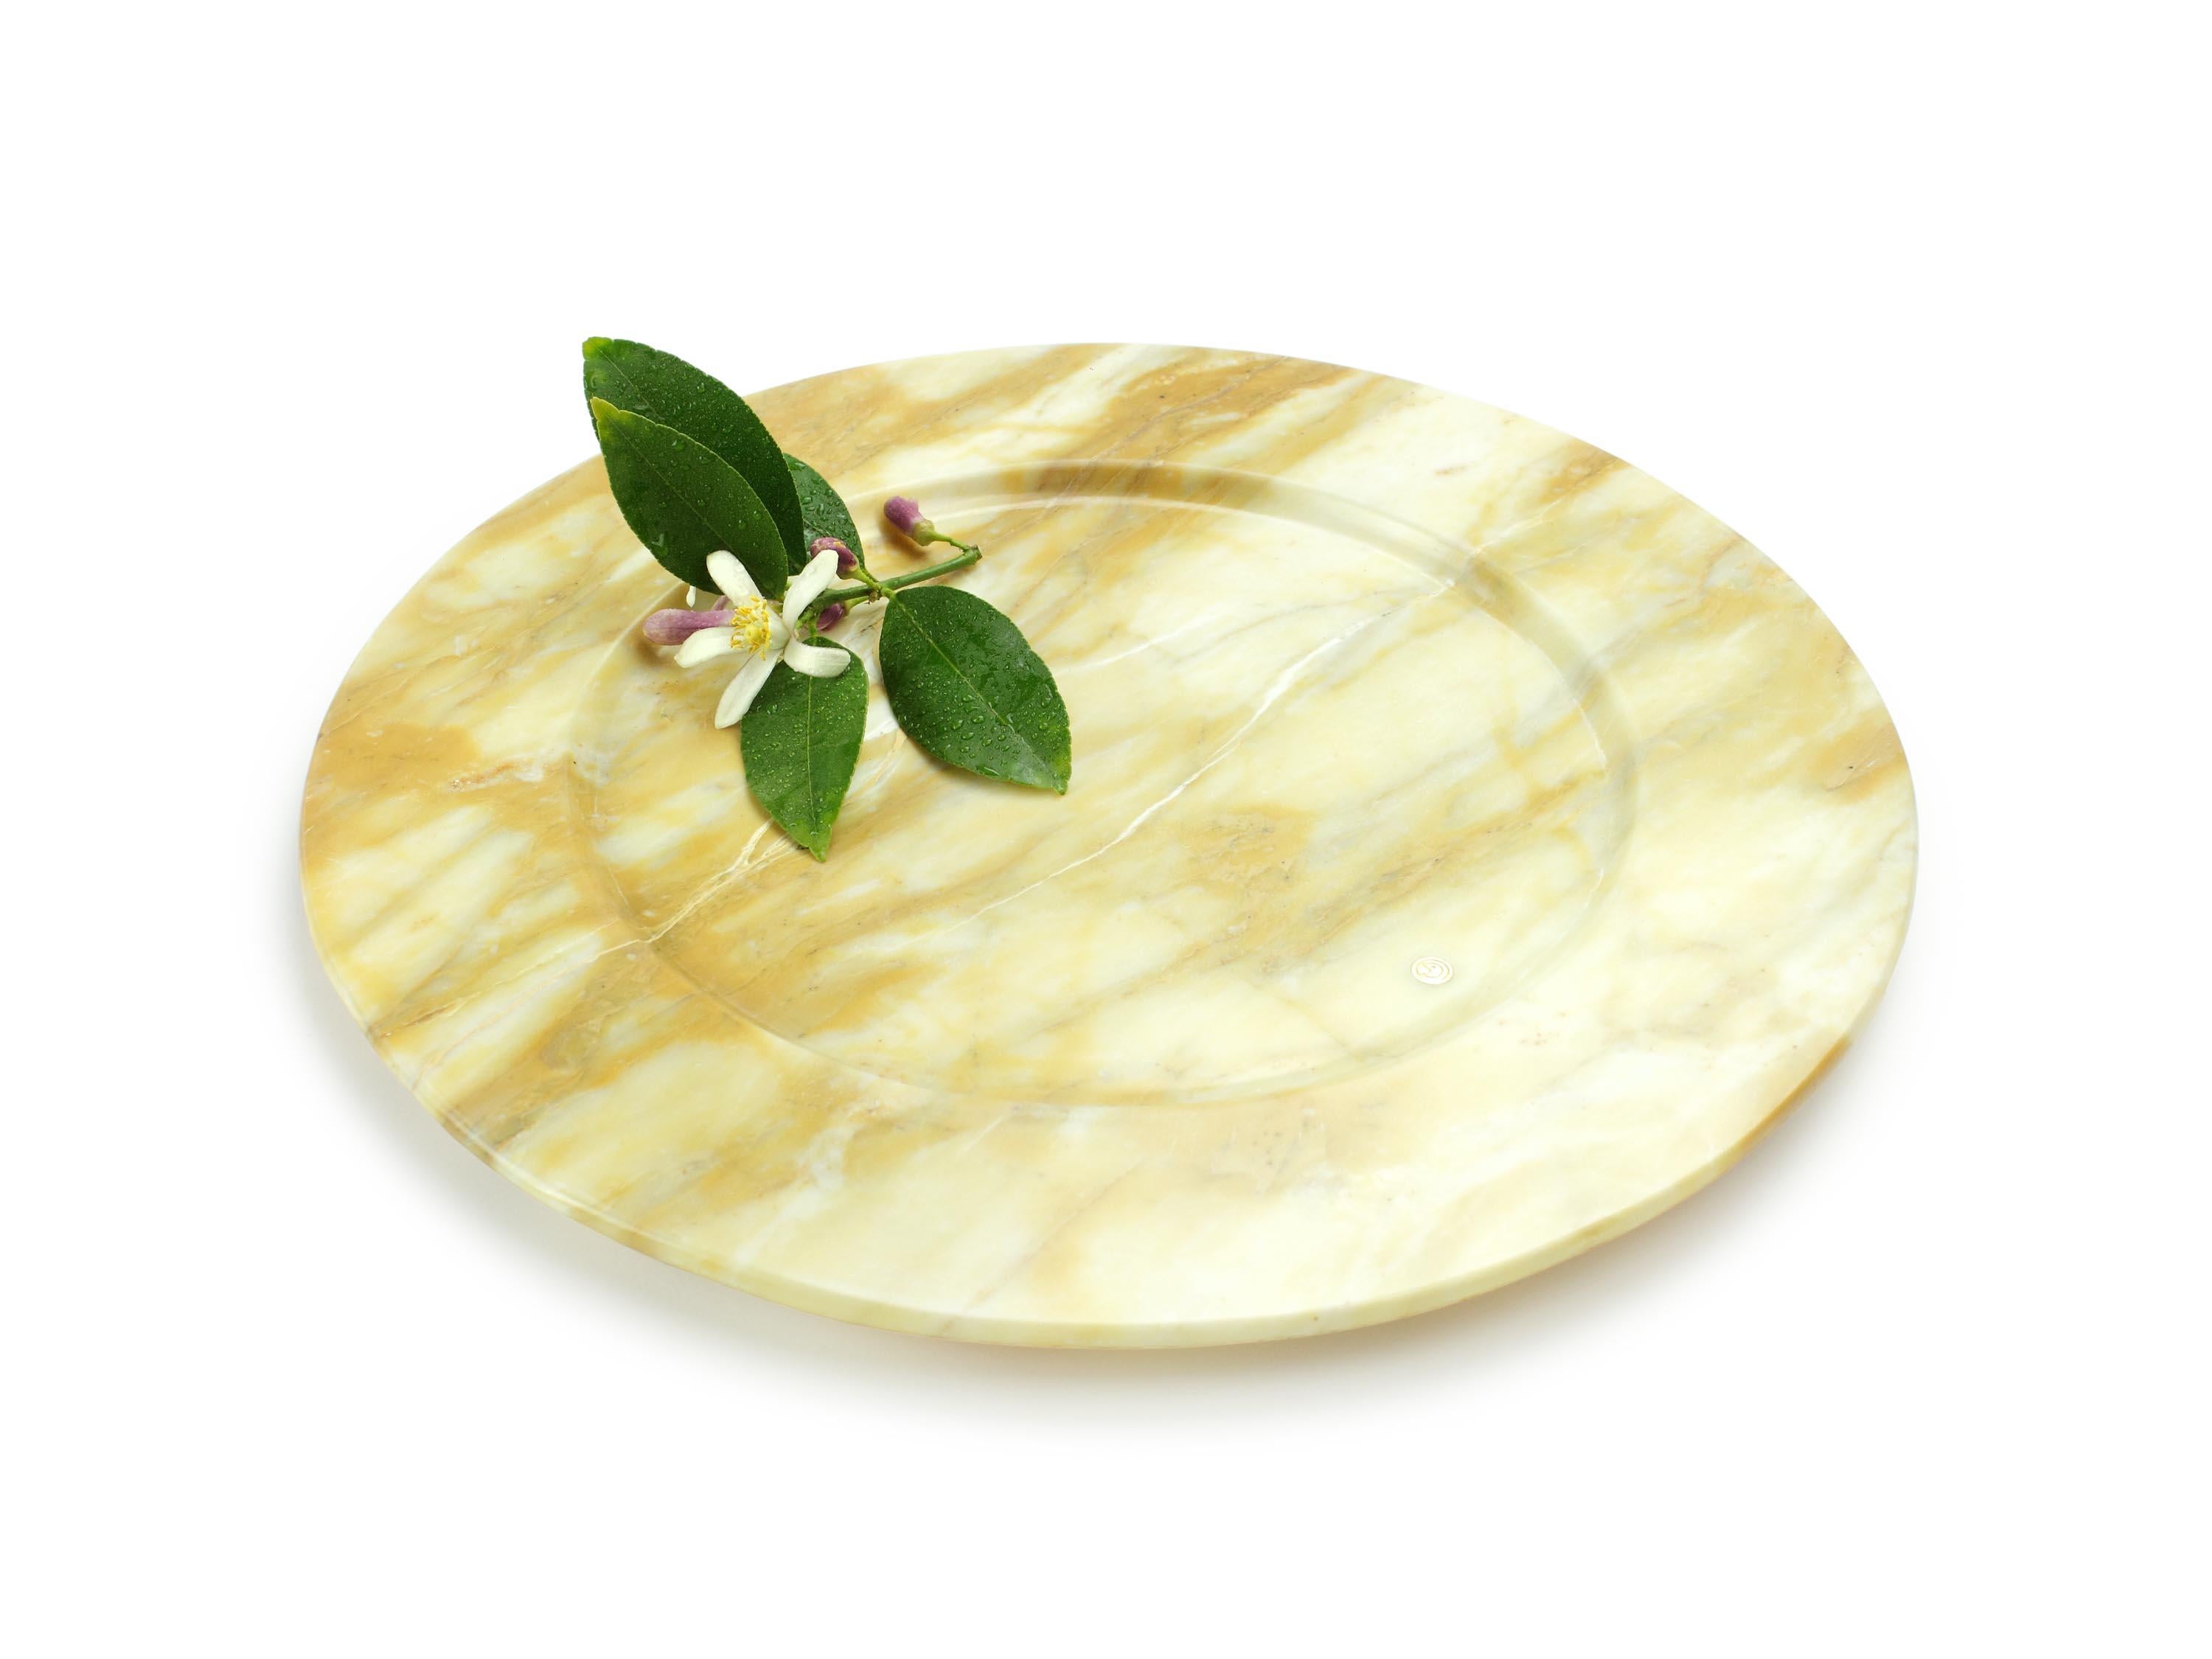 Charger Plate Platters Serveware Set of 6 White Calacatta Marble Handmade Design In New Condition For Sale In Ancona, Marche